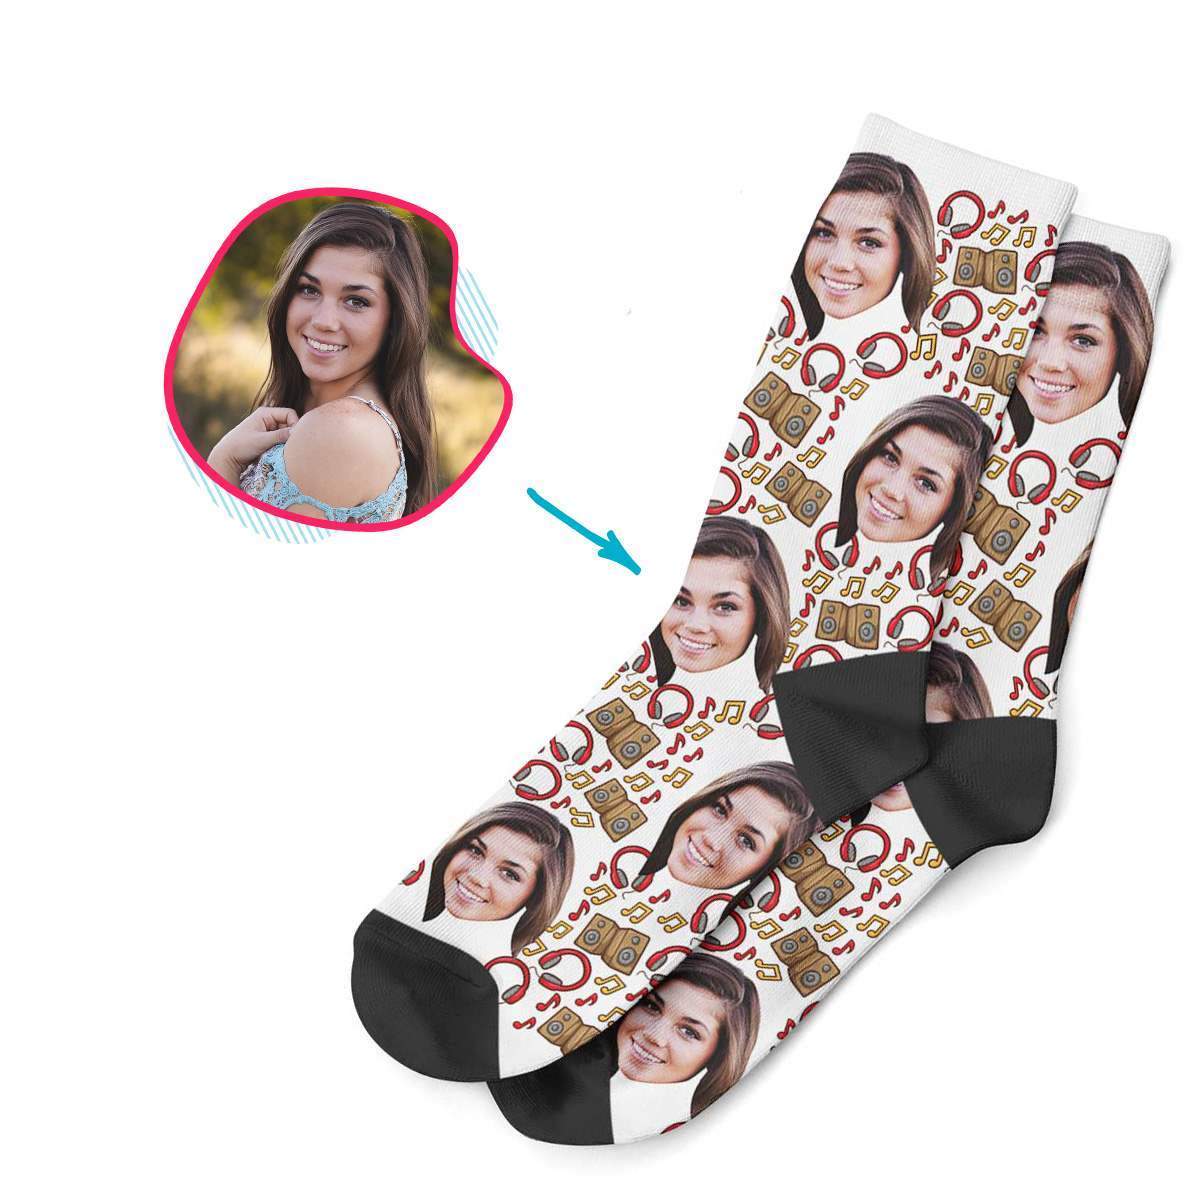 white Music socks personalized with photo of face printed on them